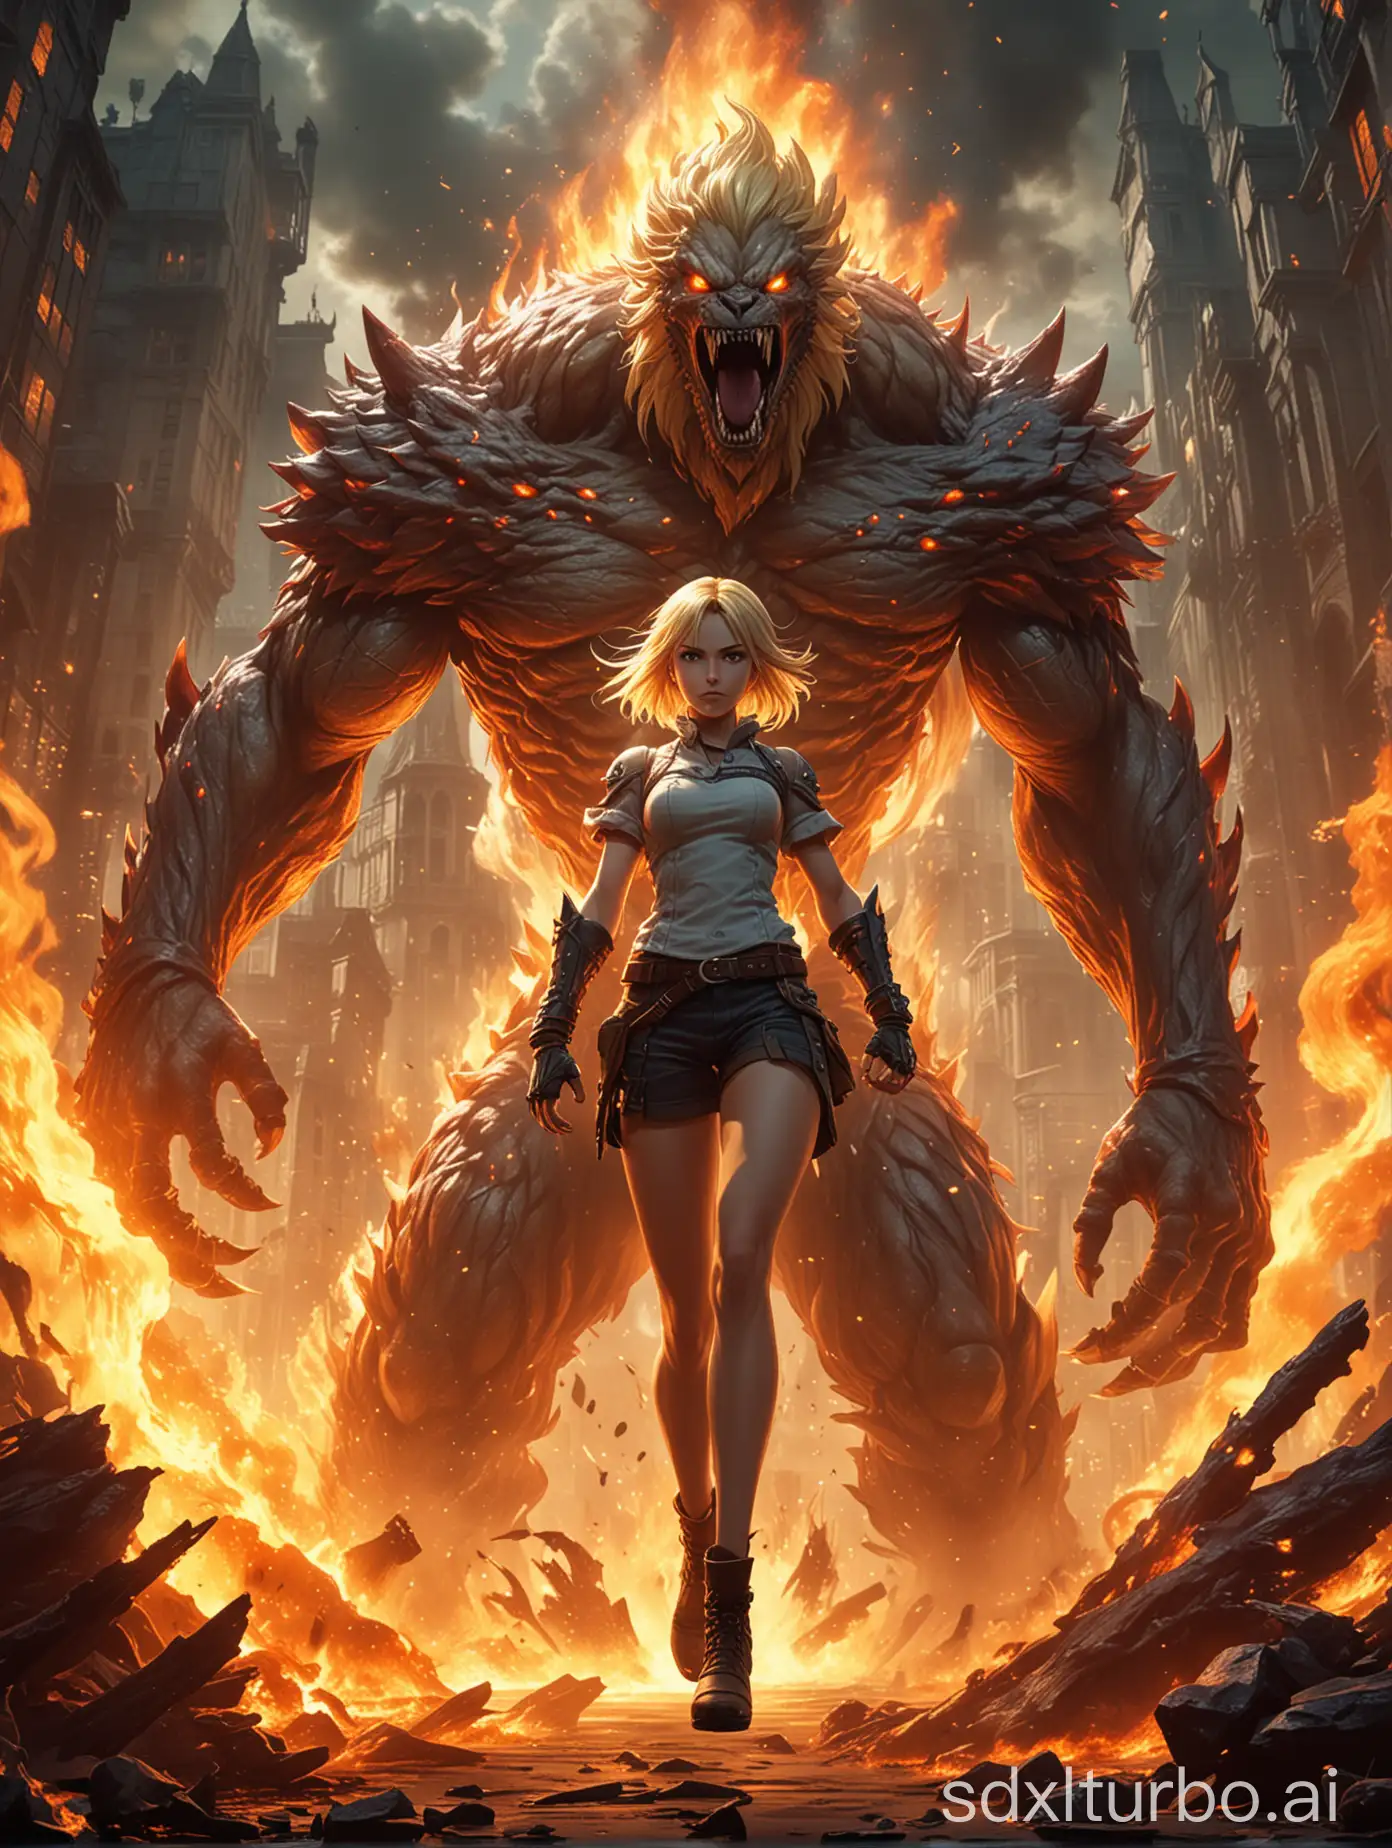 A battle action game style poster featuring a rendered anime style blonde haired girl in a dynamic full body pose facing off against a giant monster emerging from flames. High quality photo level.